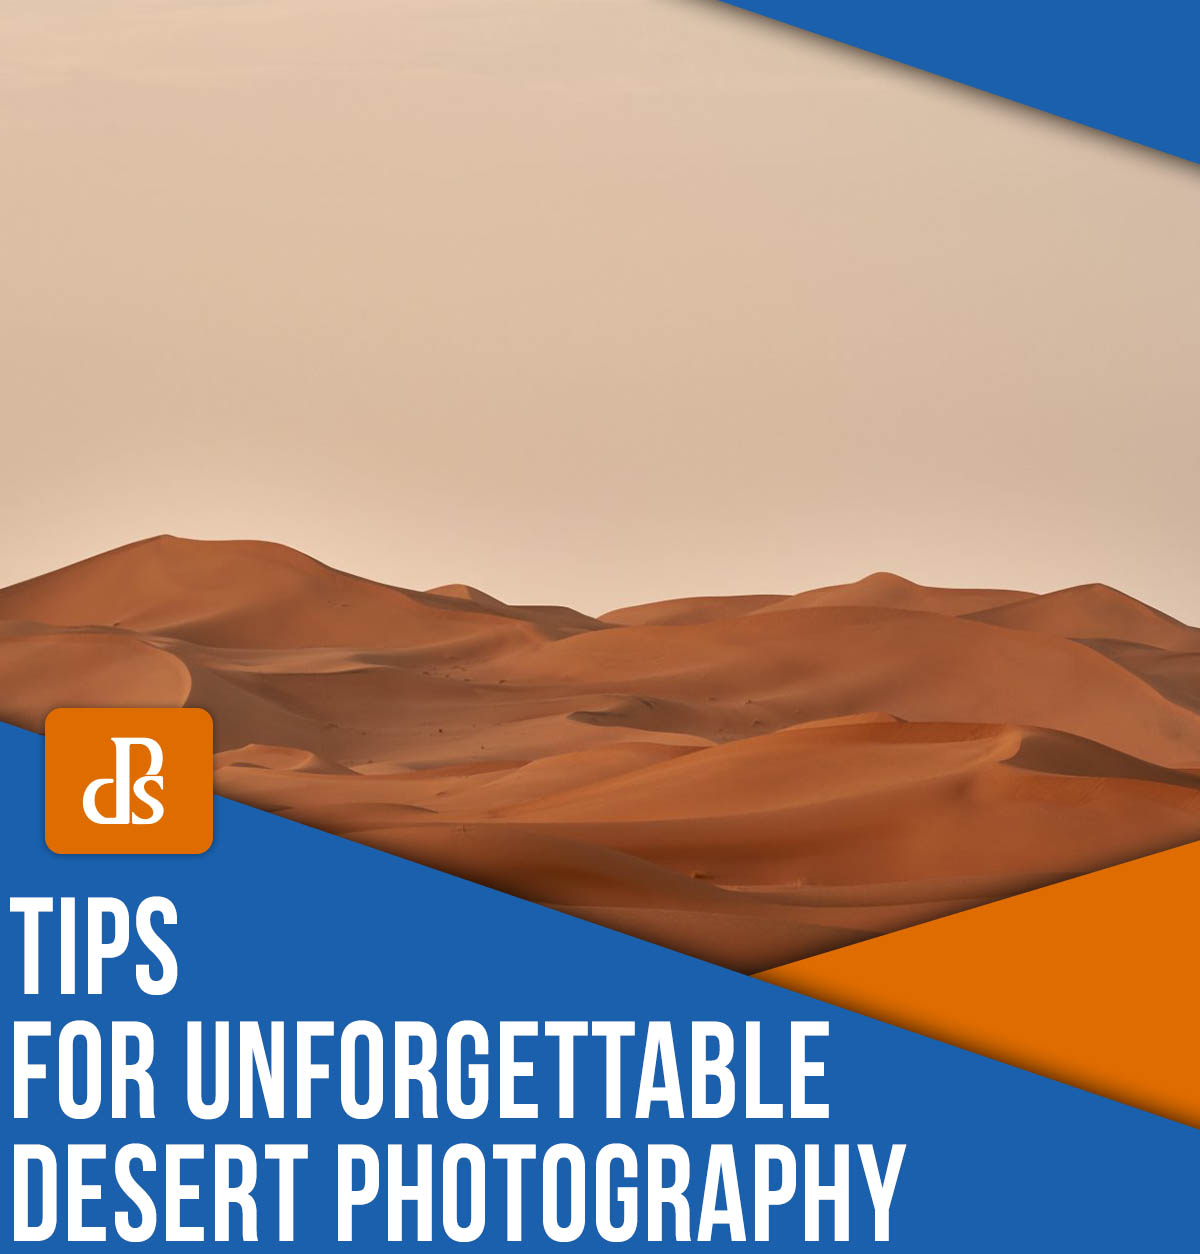 Tips for unforgettable desert photography